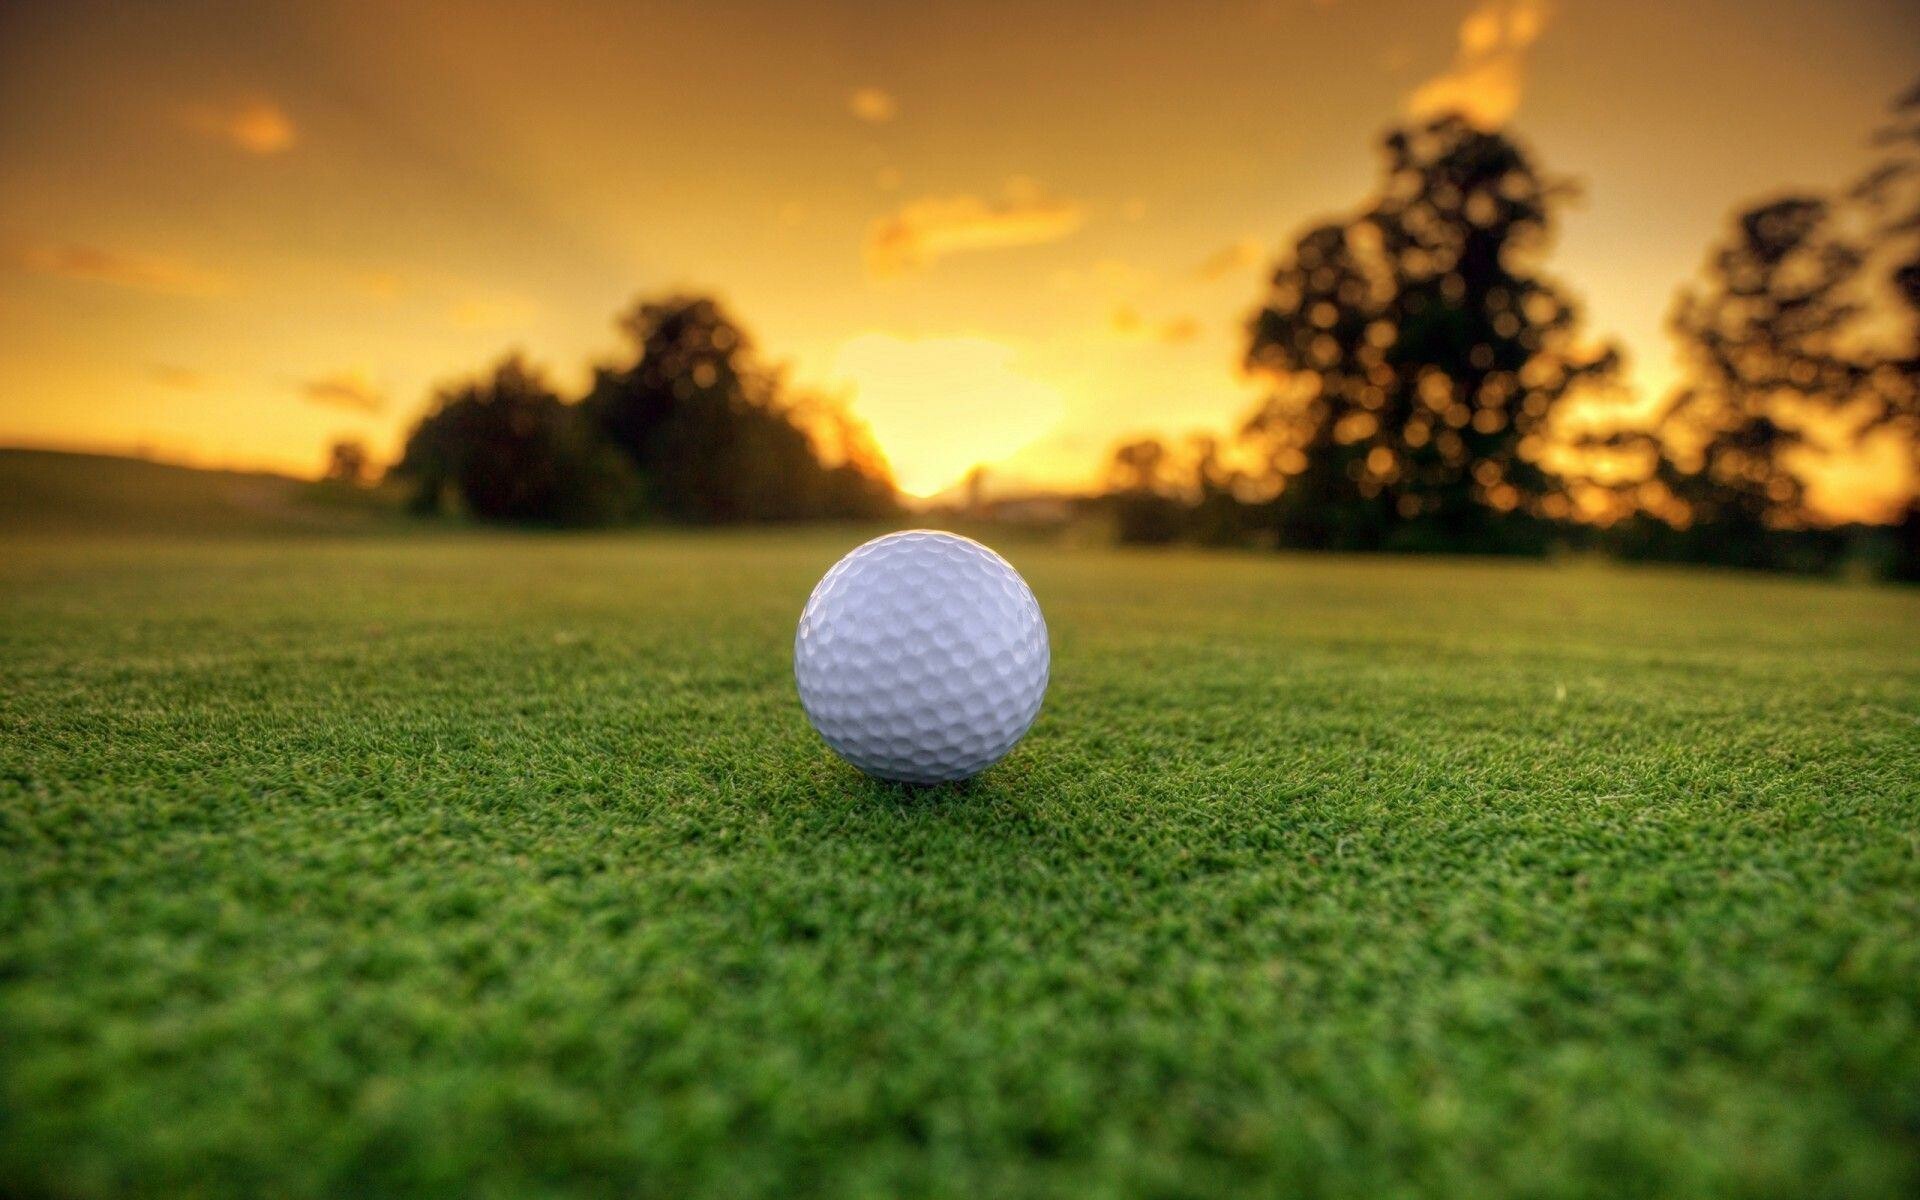 Golf: The game consists of playing the ball from a teeing ground into a hole, Course. 1920x1200 HD Wallpaper.